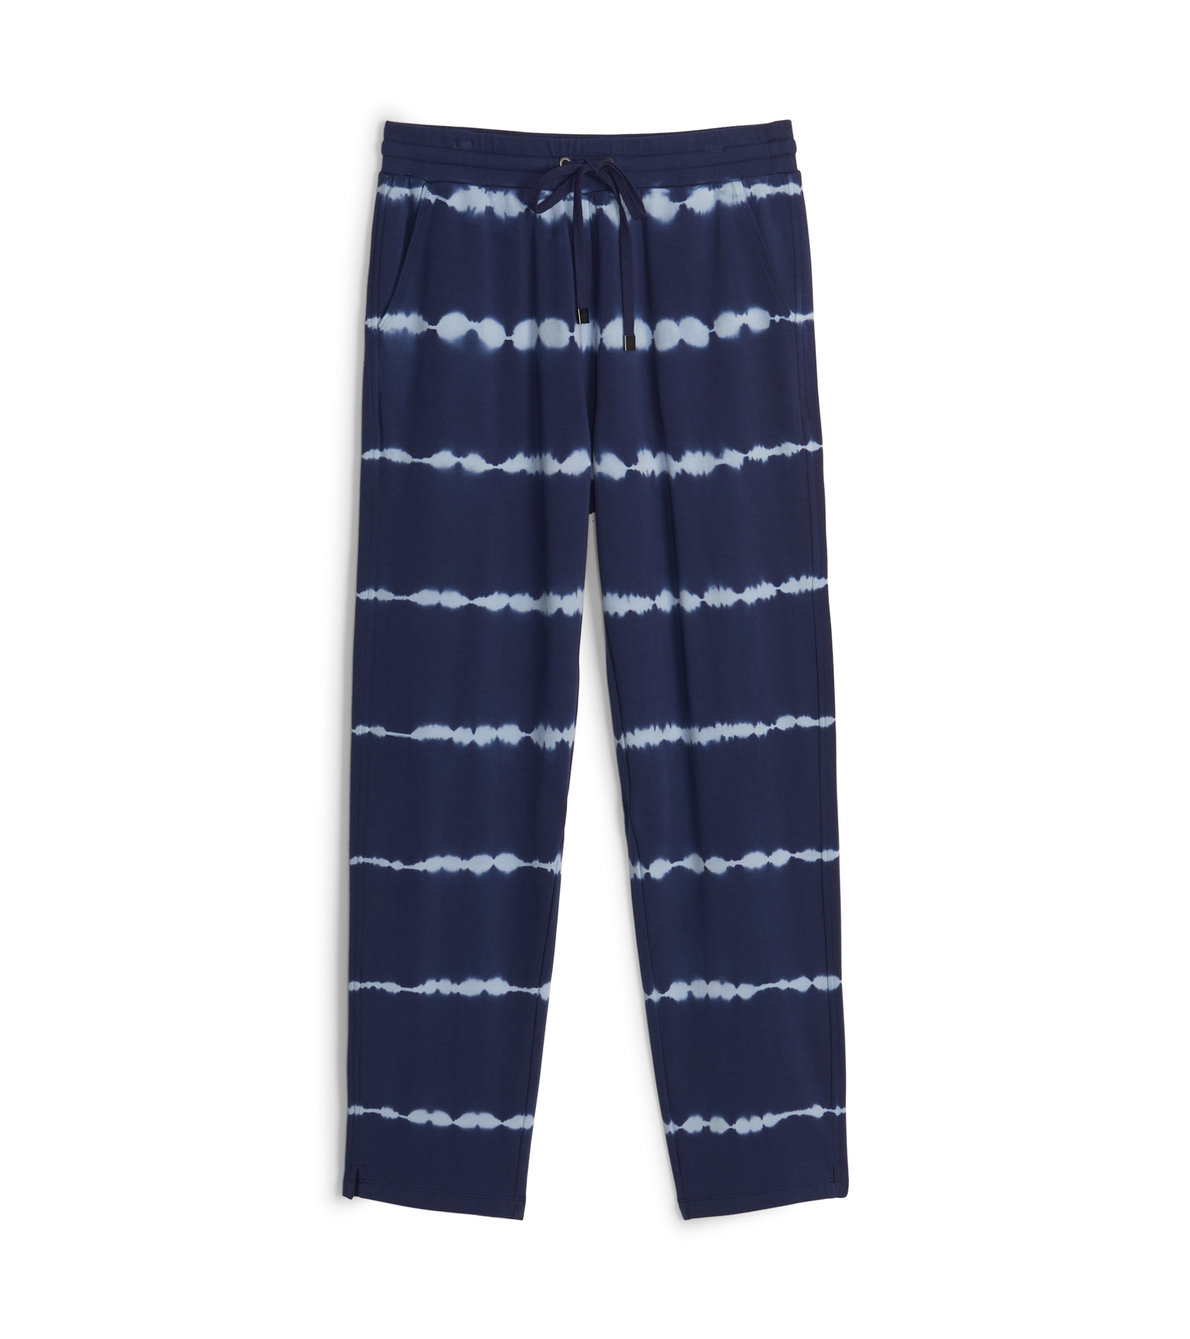 View larger image of Adrien Joggers - Navy Tie Dye